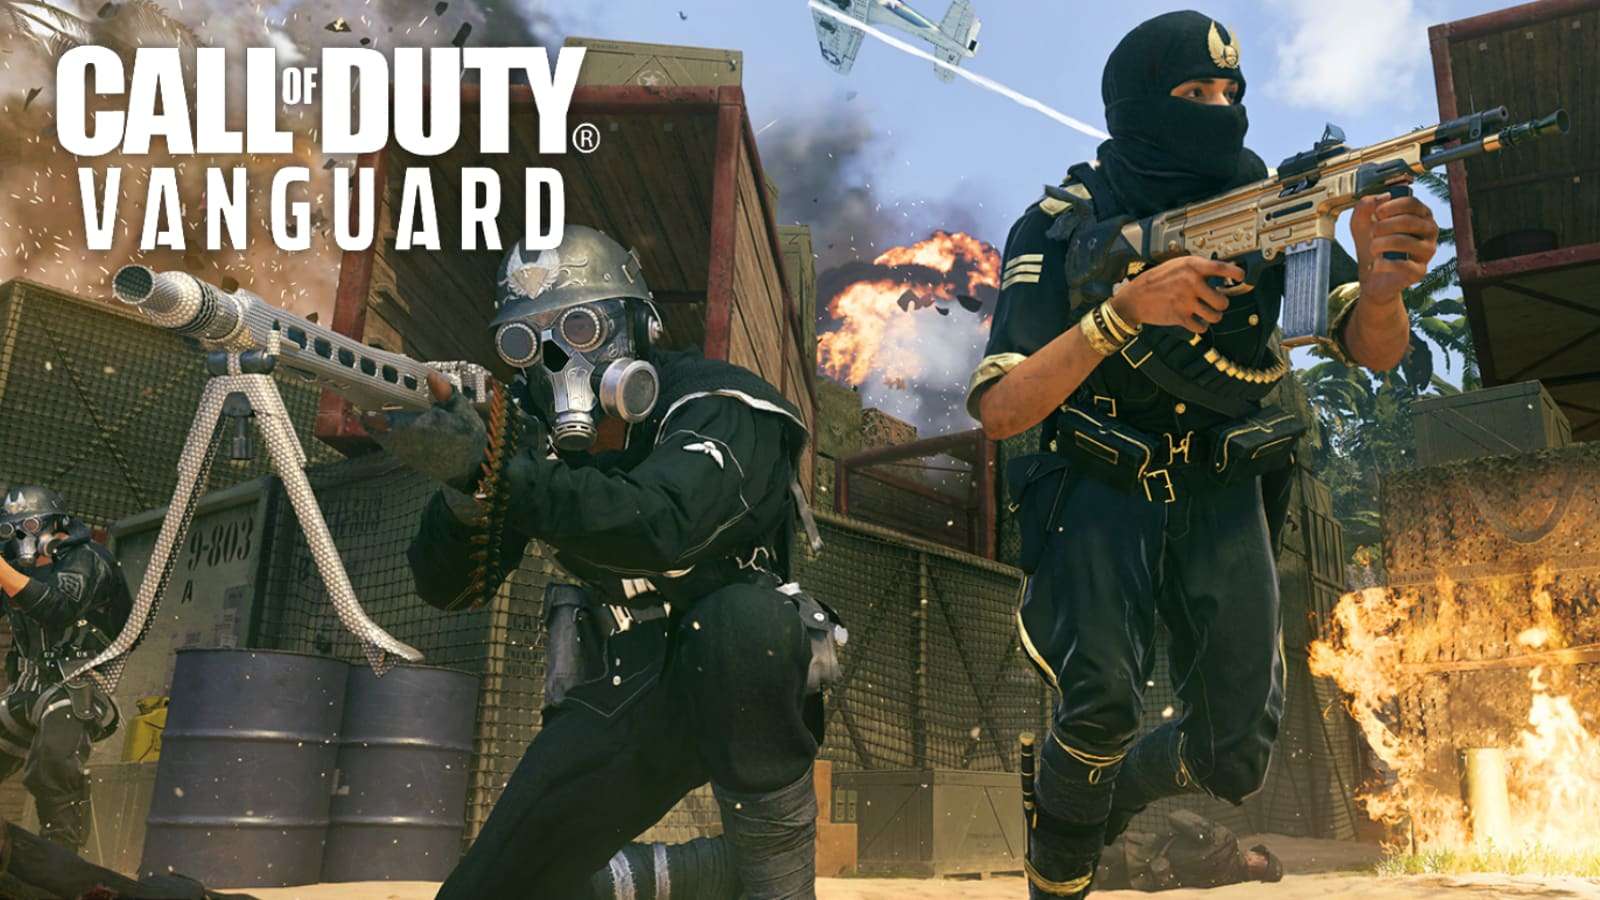 Call of Duty Vanguard Nov 18 update patch notes: Bloom fixed, shotguns nerfed, more